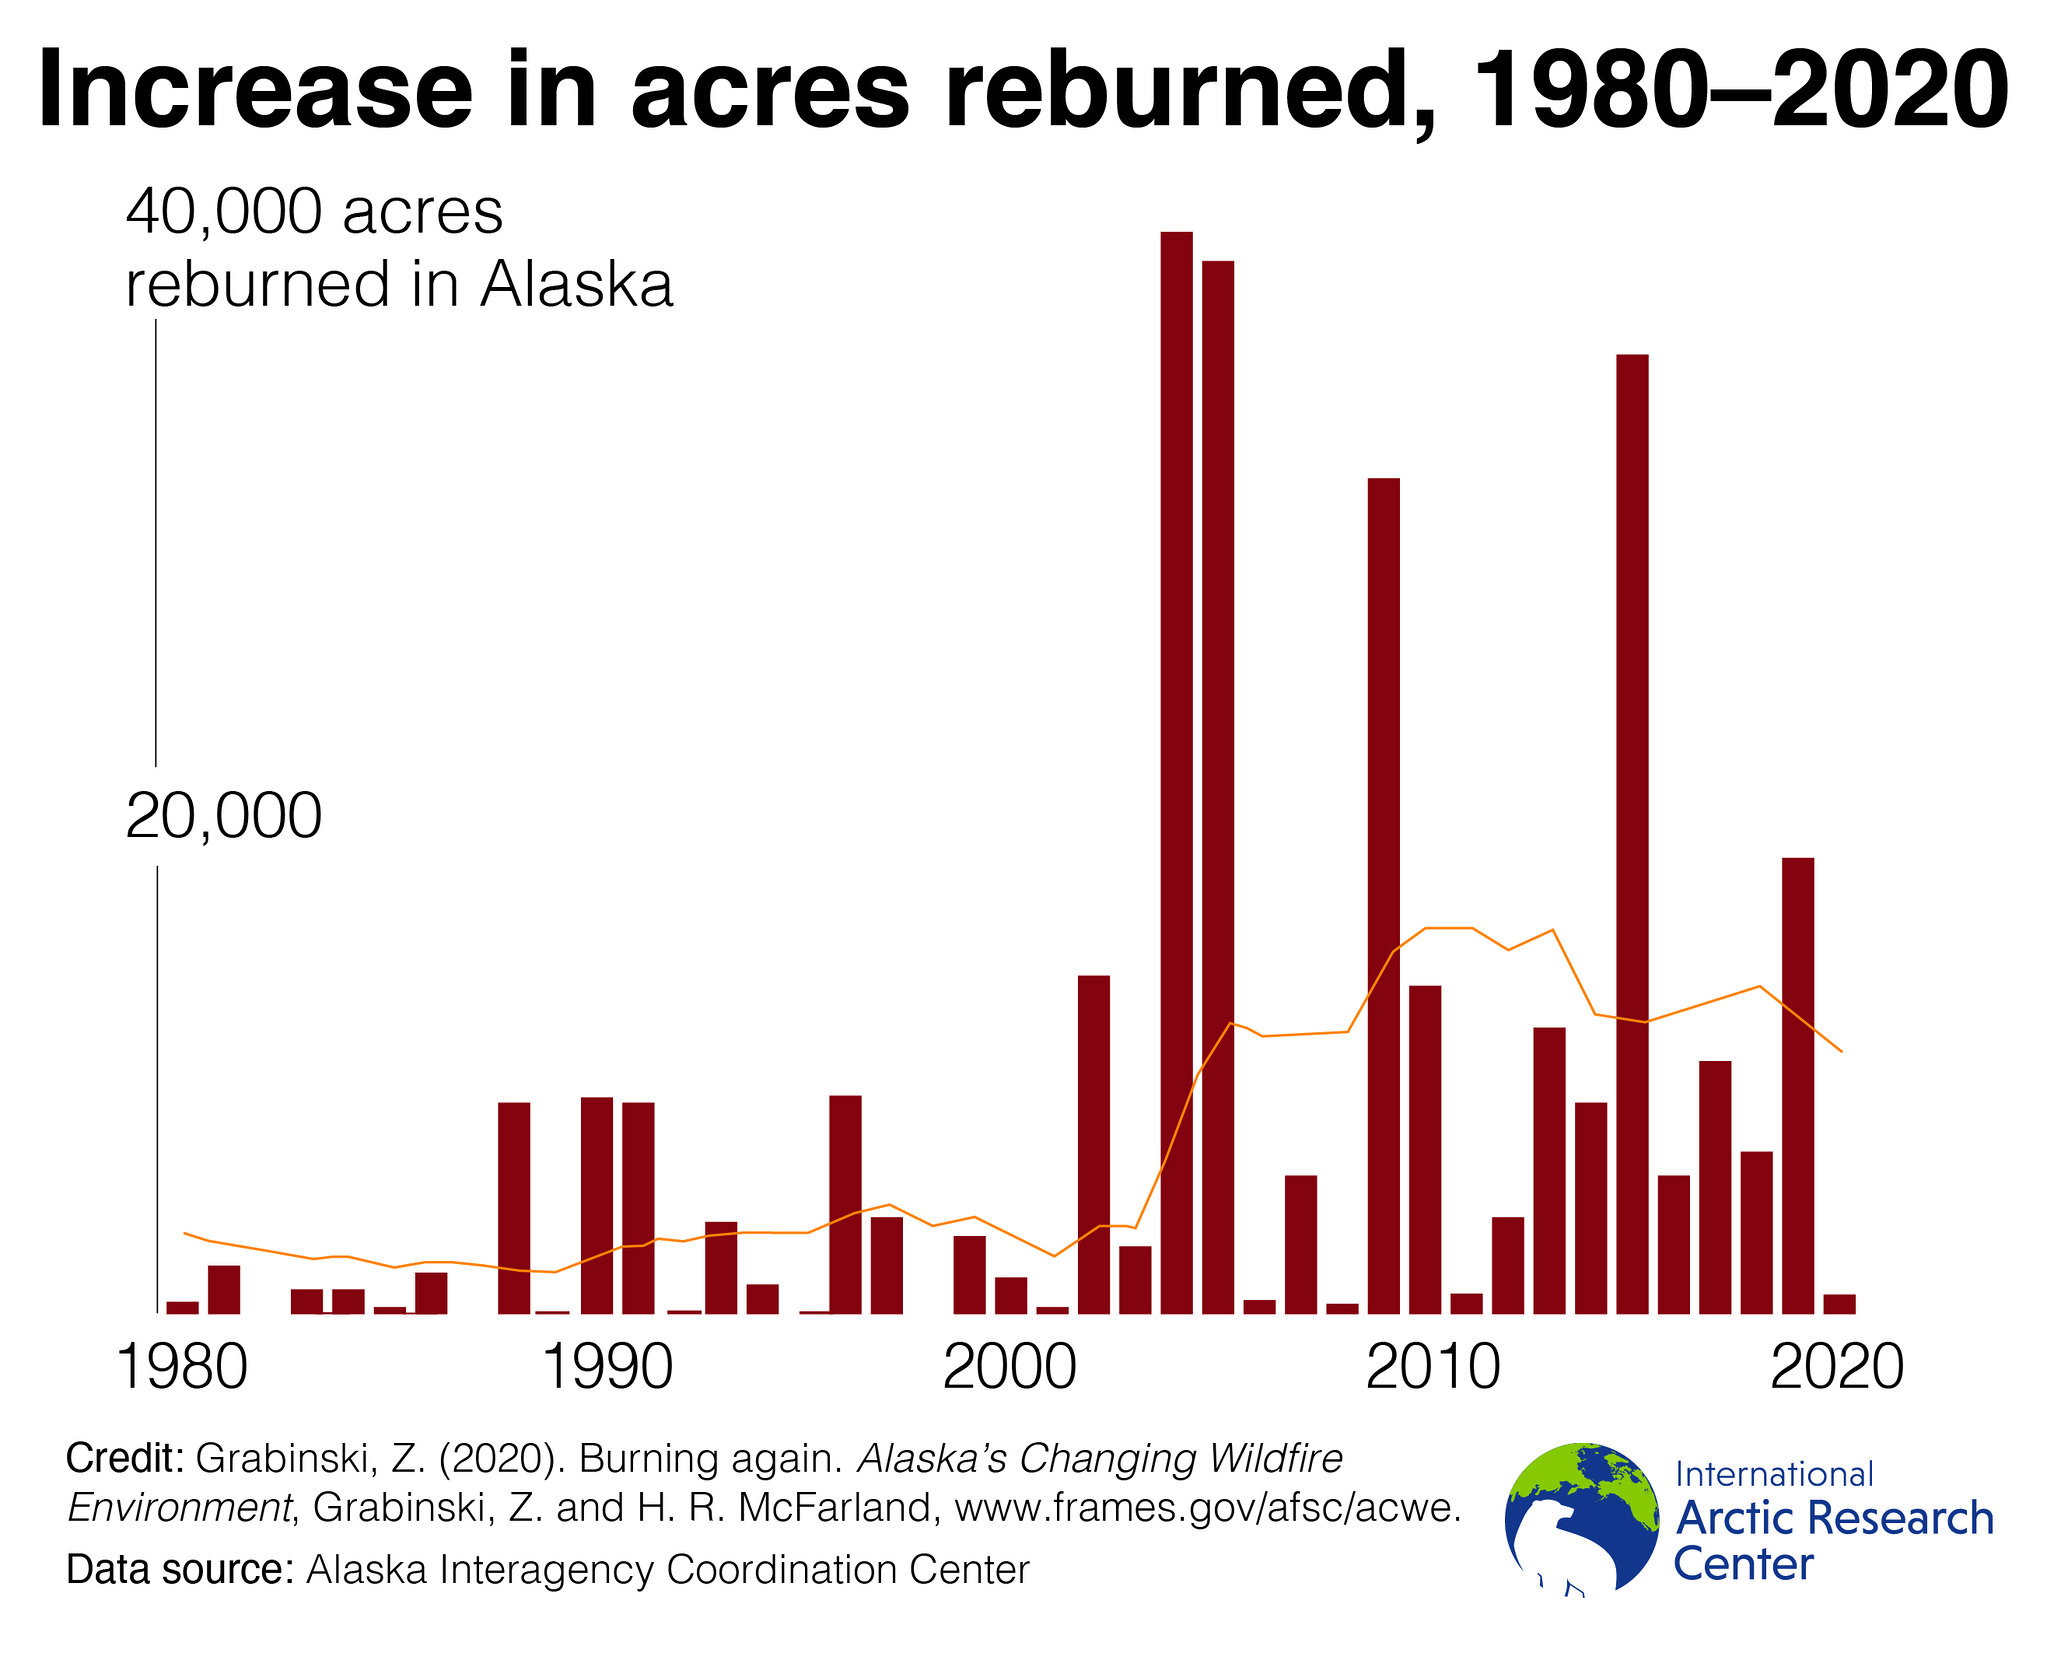 A graph showing the increase in acreage reburned annually in Alaska.